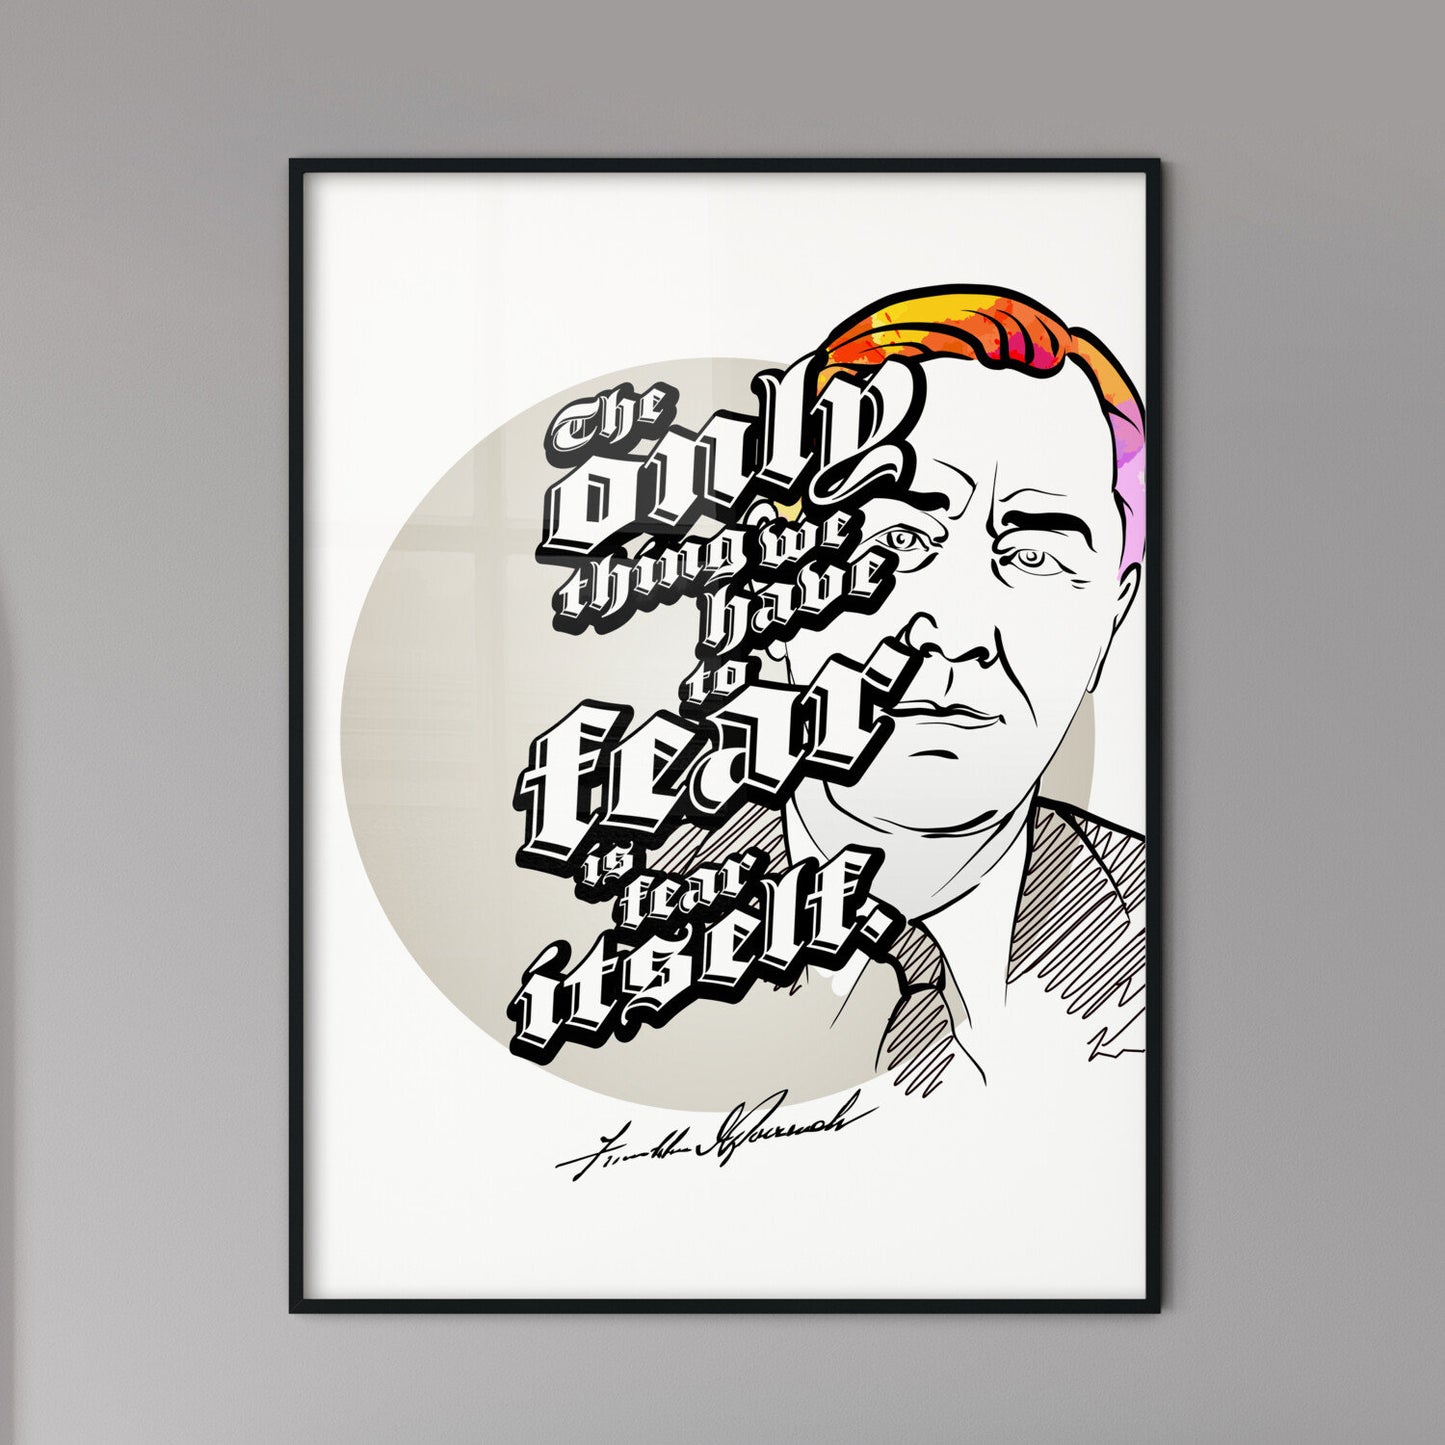 The Only Thing We Have To Fear Is Fear Itself Lettering With Franklin D. Roosevelt Portrait. Perfect print for patriots.